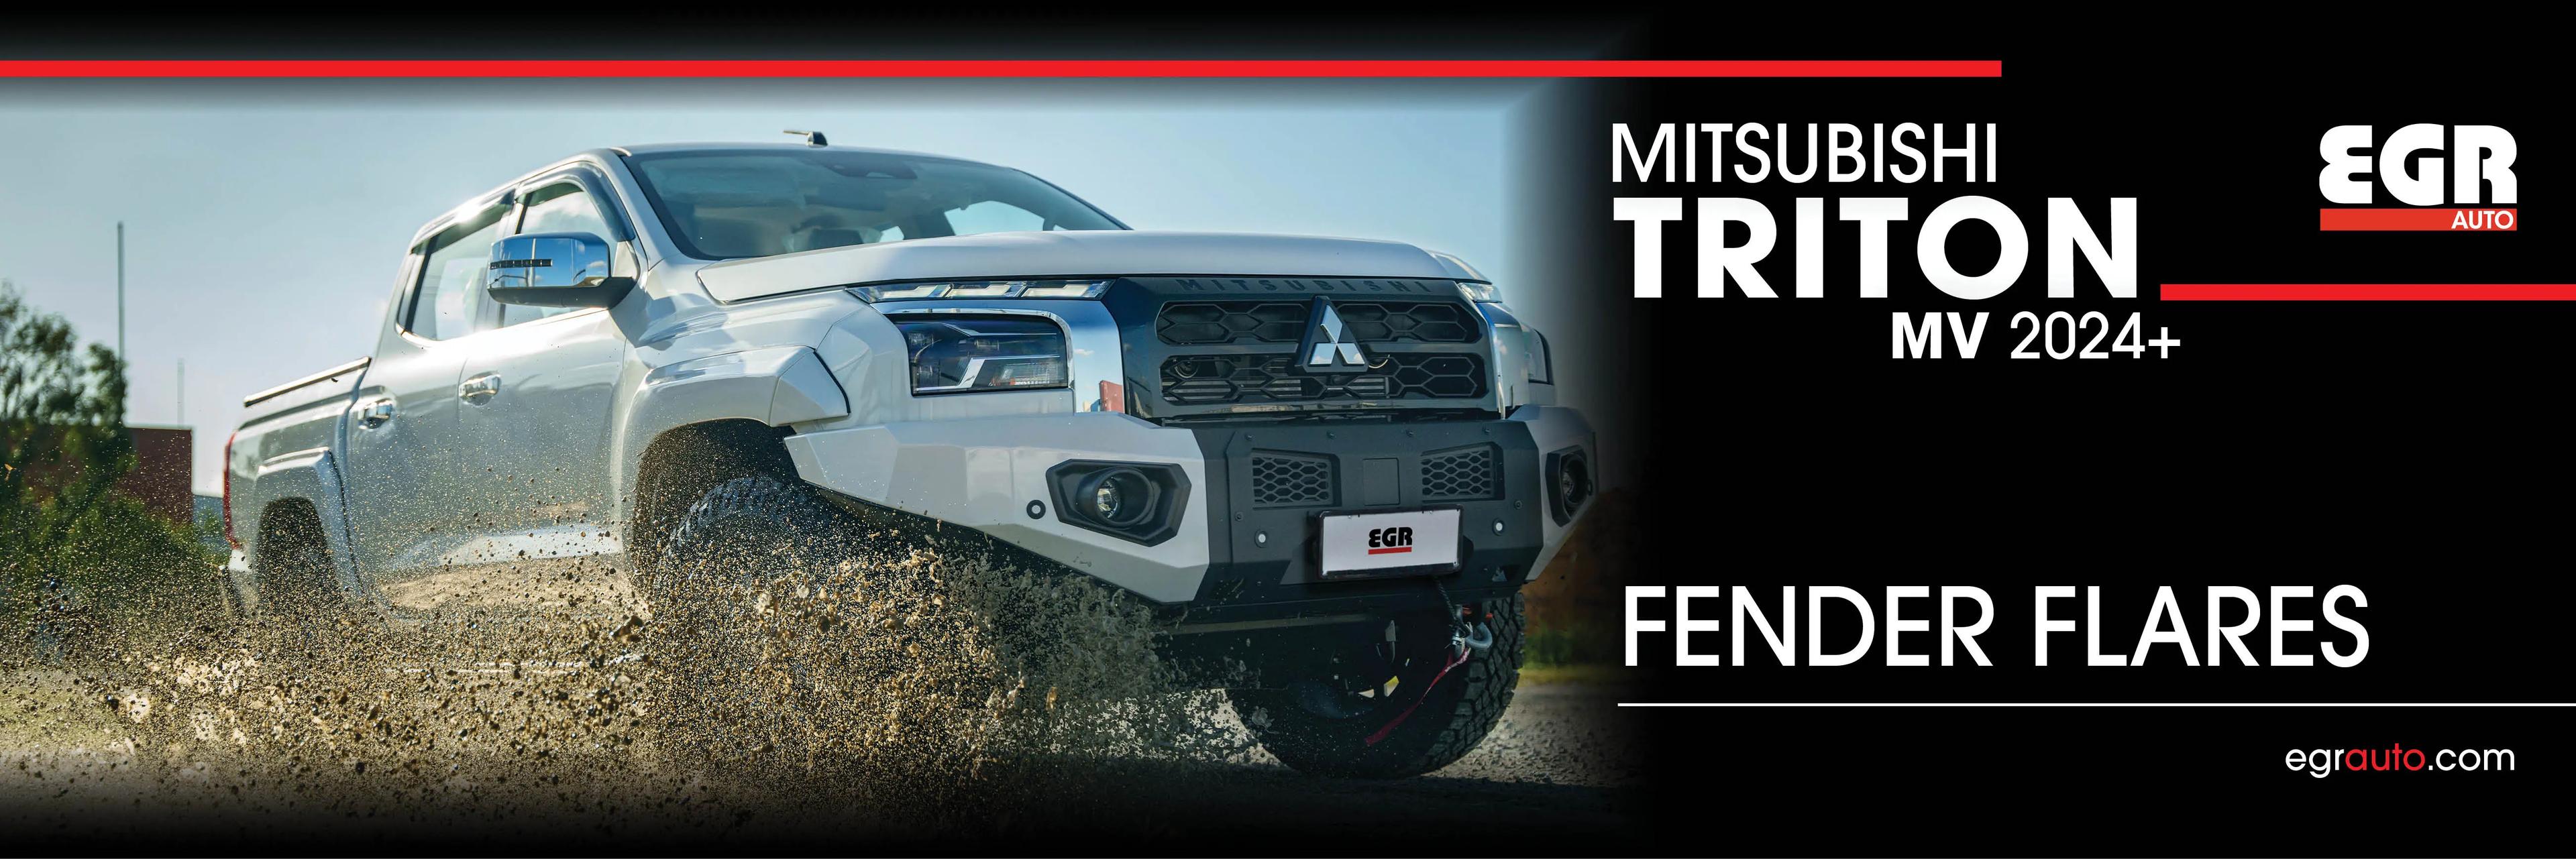 Promo banner - Click here for new EGR Fender Flares available now for the Mitsubishi Triton MV 2024.